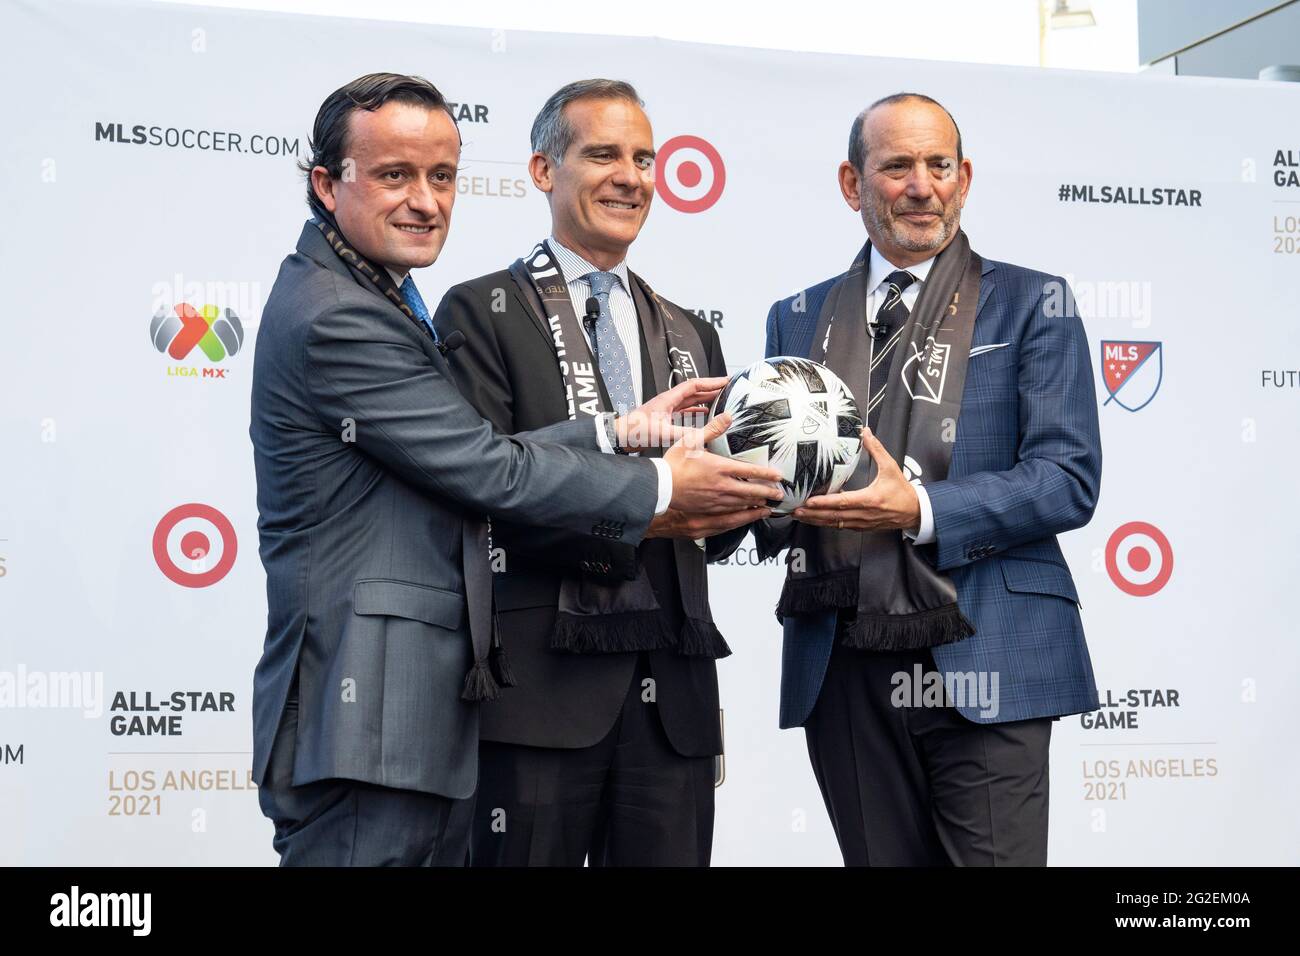 LIGA MX Executive President Mikel Arriola, Mayor of Los Angeles Eric Garcetti, MLS Commissioner Don Garber during a MLS and LIGA MX press announcement Stock Photo